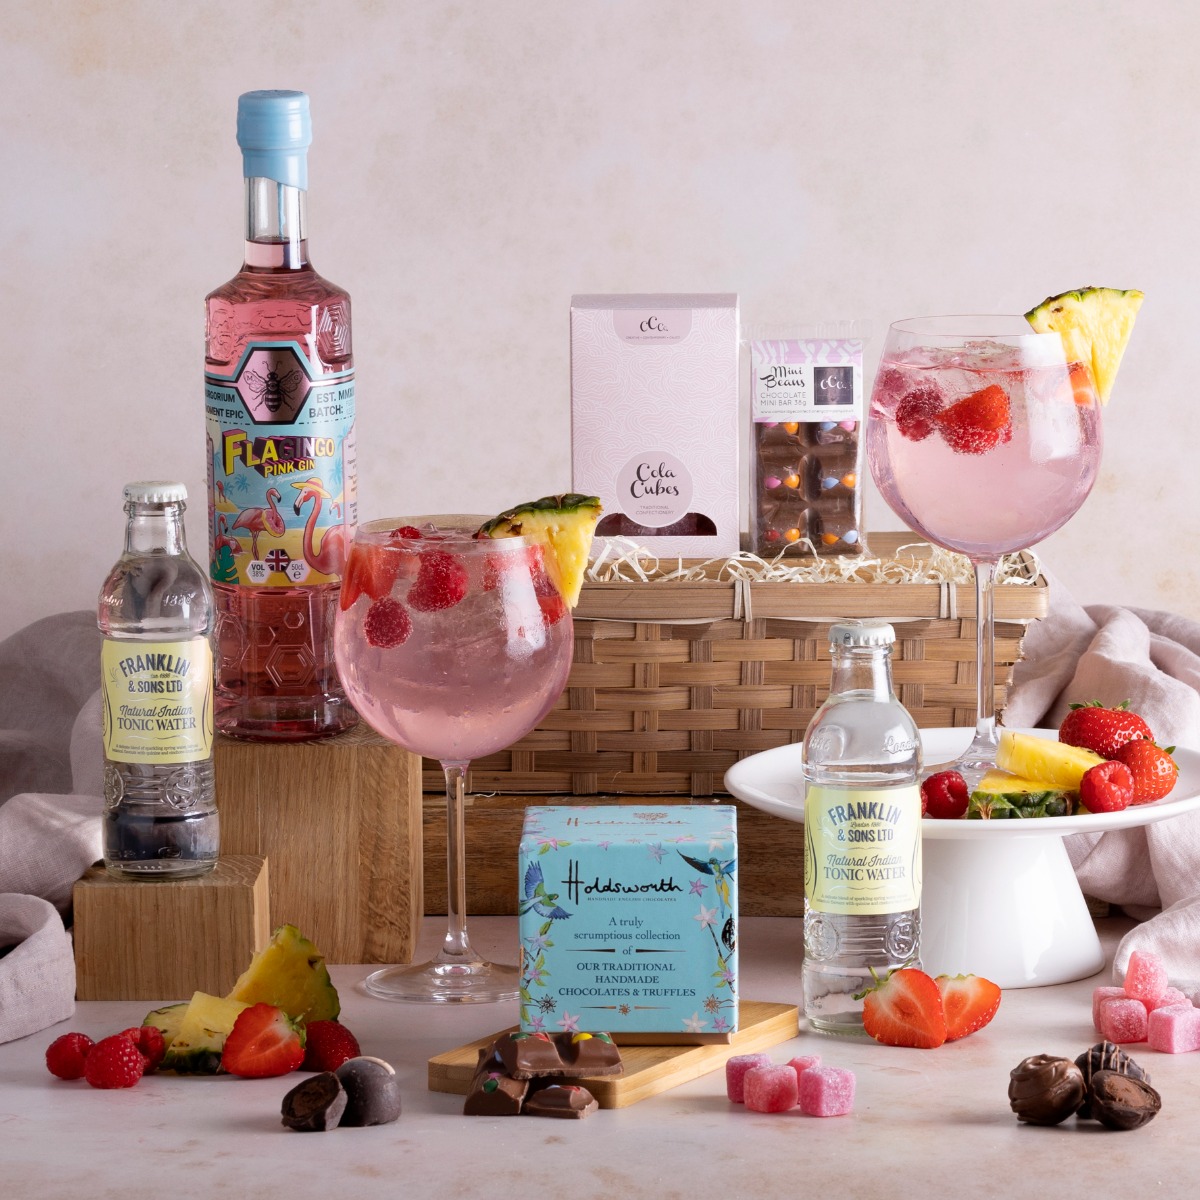 Flangingo Pink Gin Hamper with content on display as recommendation for a Mother’s Day gift basket